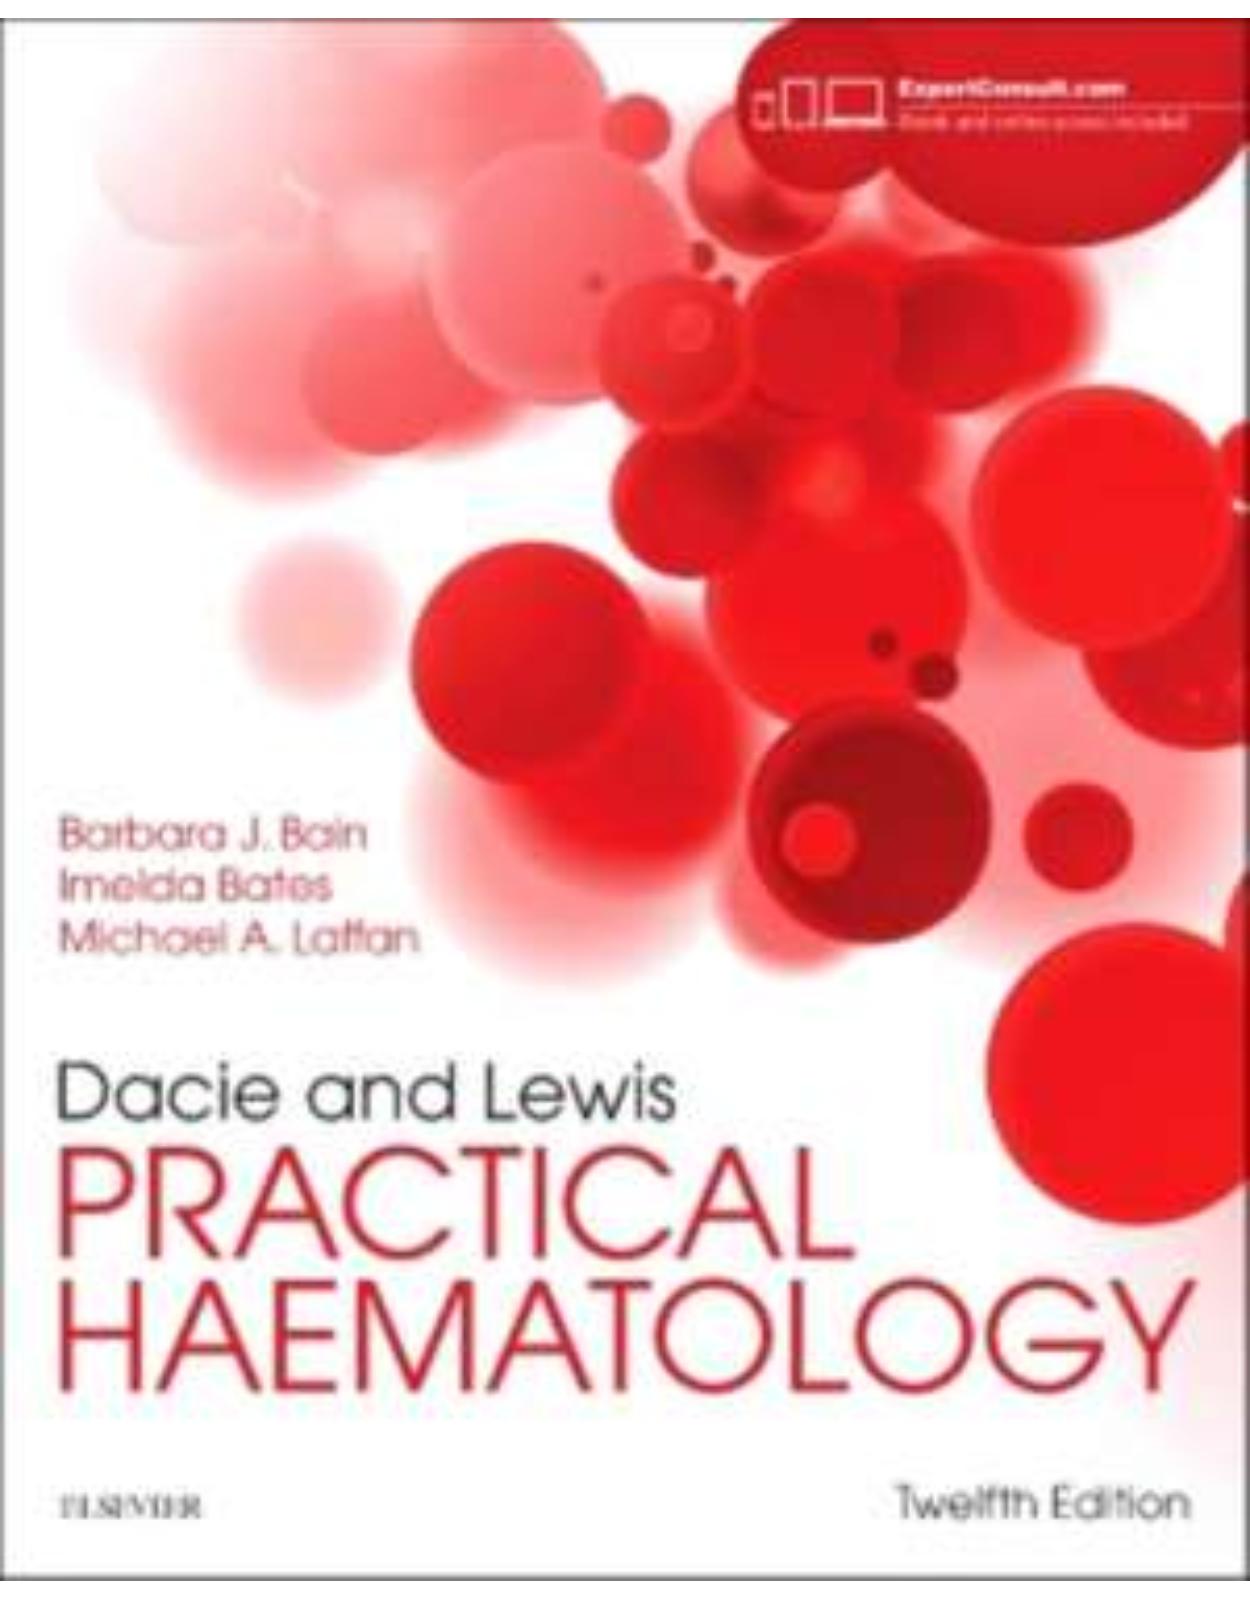 Dacie and Lewis Practical Haematology, 12th Edition